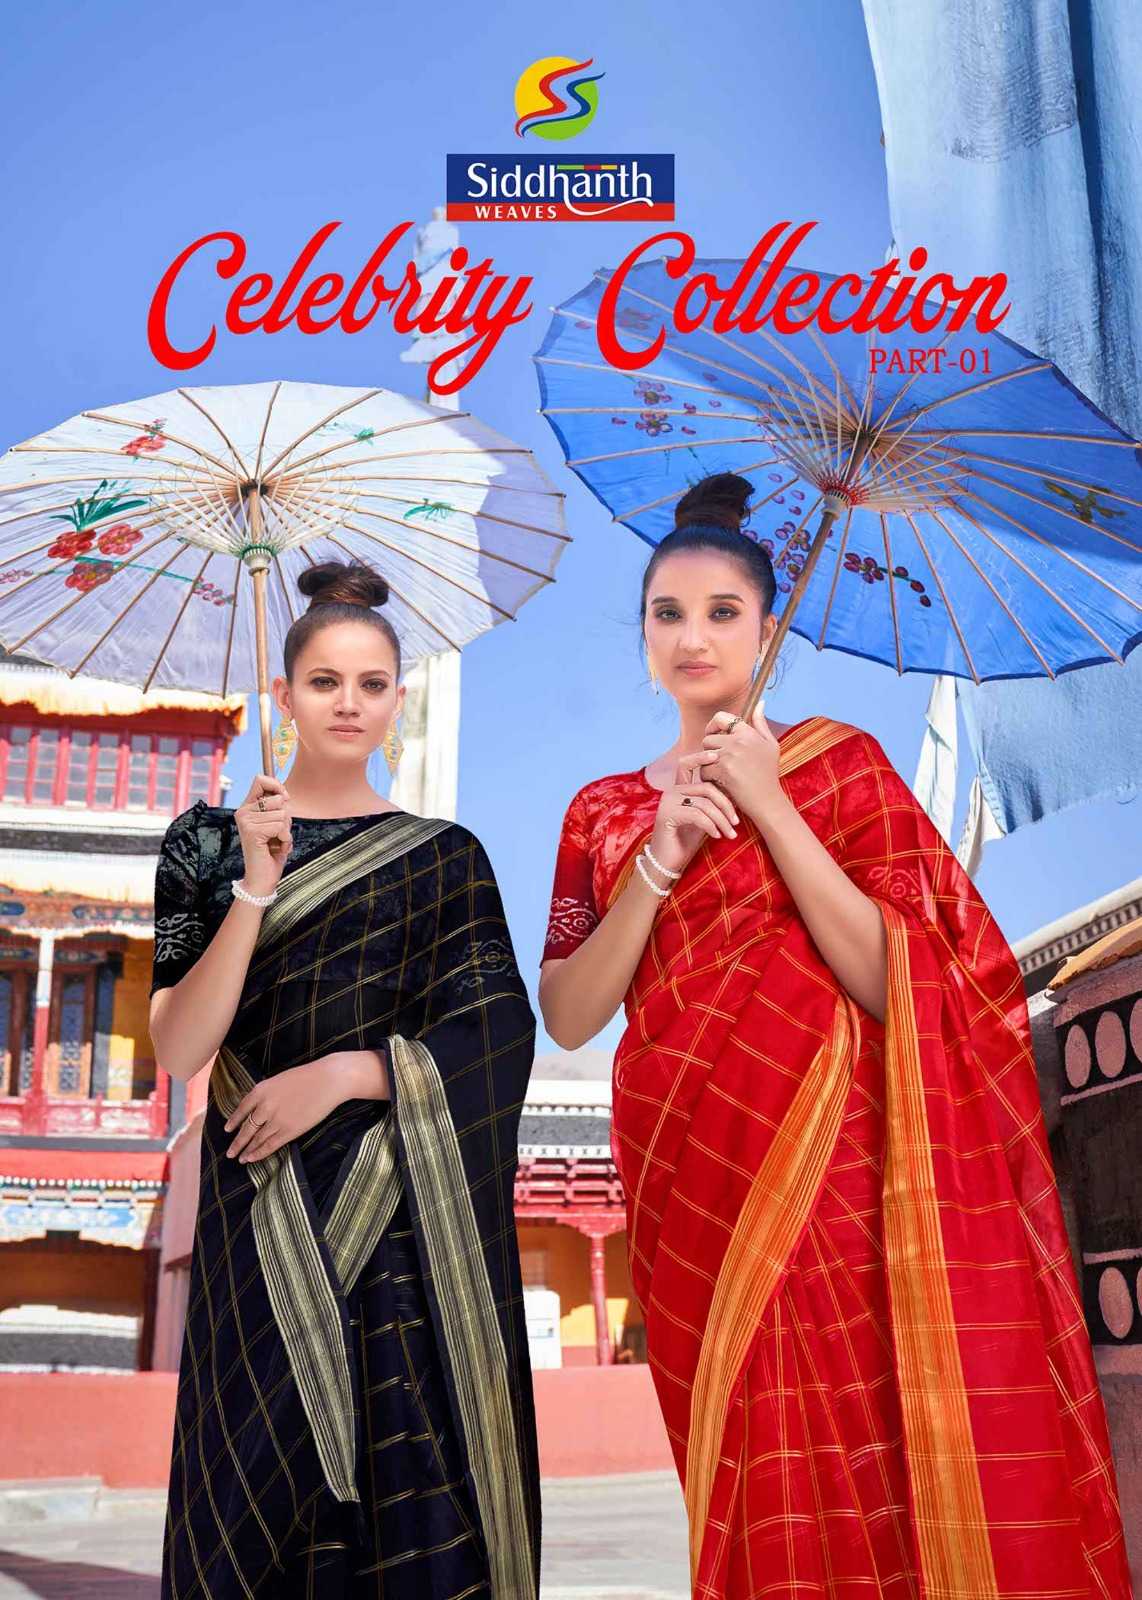 siddhanth weaves celebrity collection vol 1 beautiful cotton fancy saree